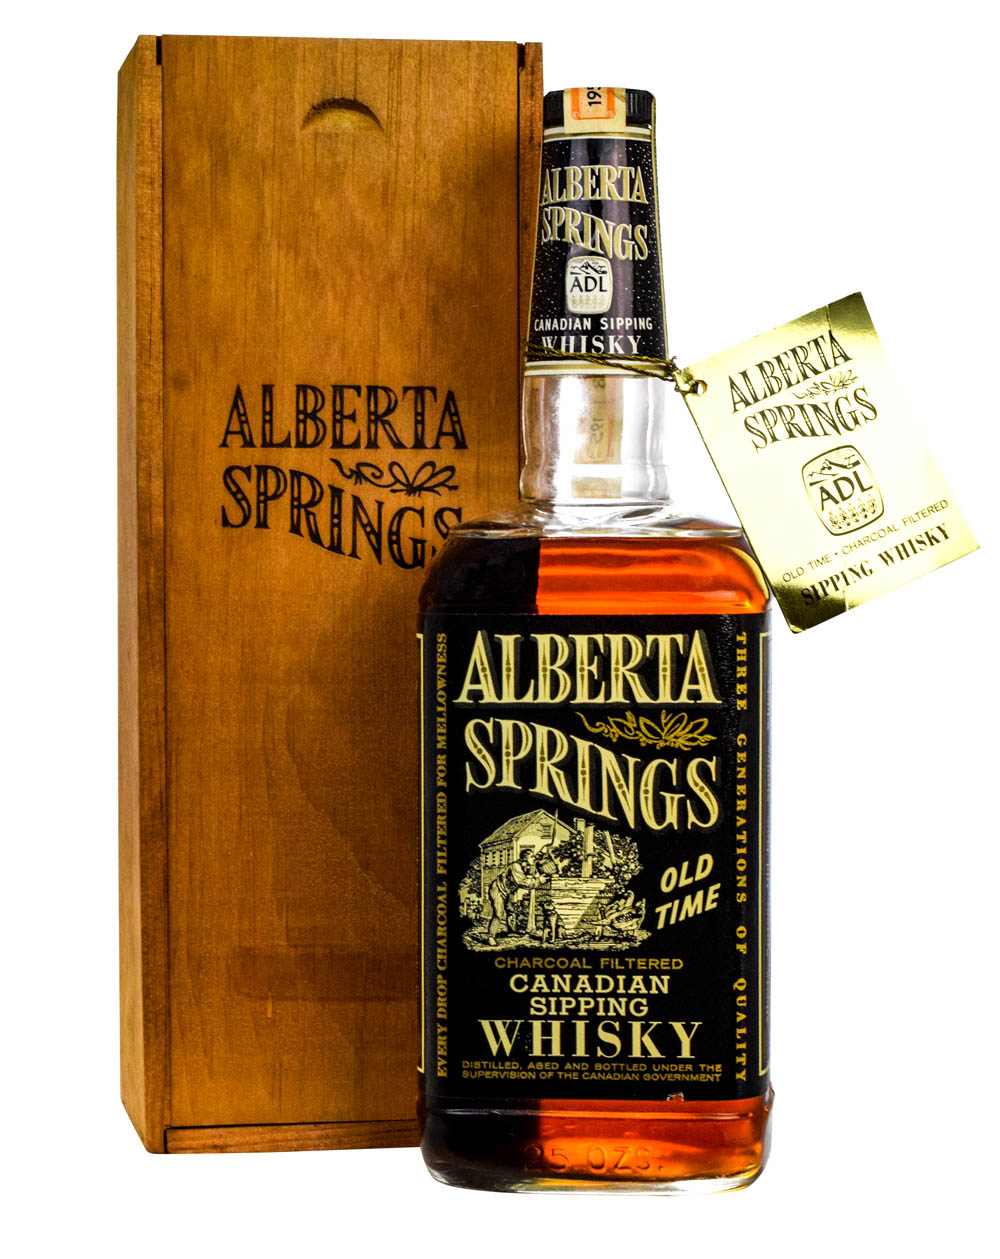 Alberta Springs Canadian Sipping Whisky 1953 Box Must Have Malts MHM